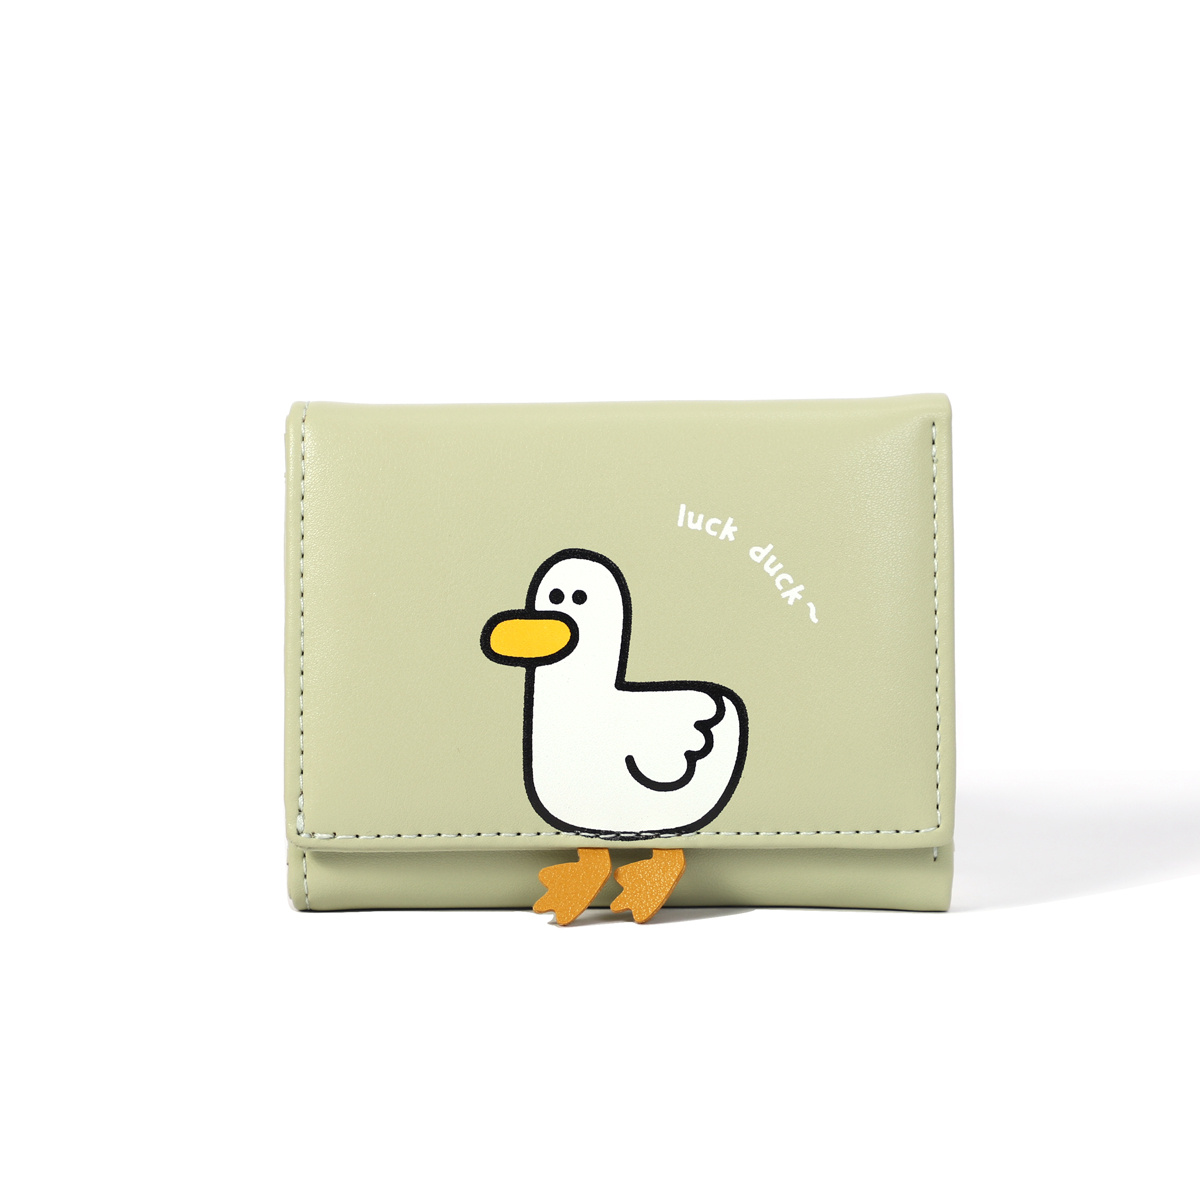 Amamcy Girls Cute 3D Duck Tri-folded Wallet Small Wallet Coin Purse Cash  Pocket RFID Blocking Card Holder ID Window Purse for Women